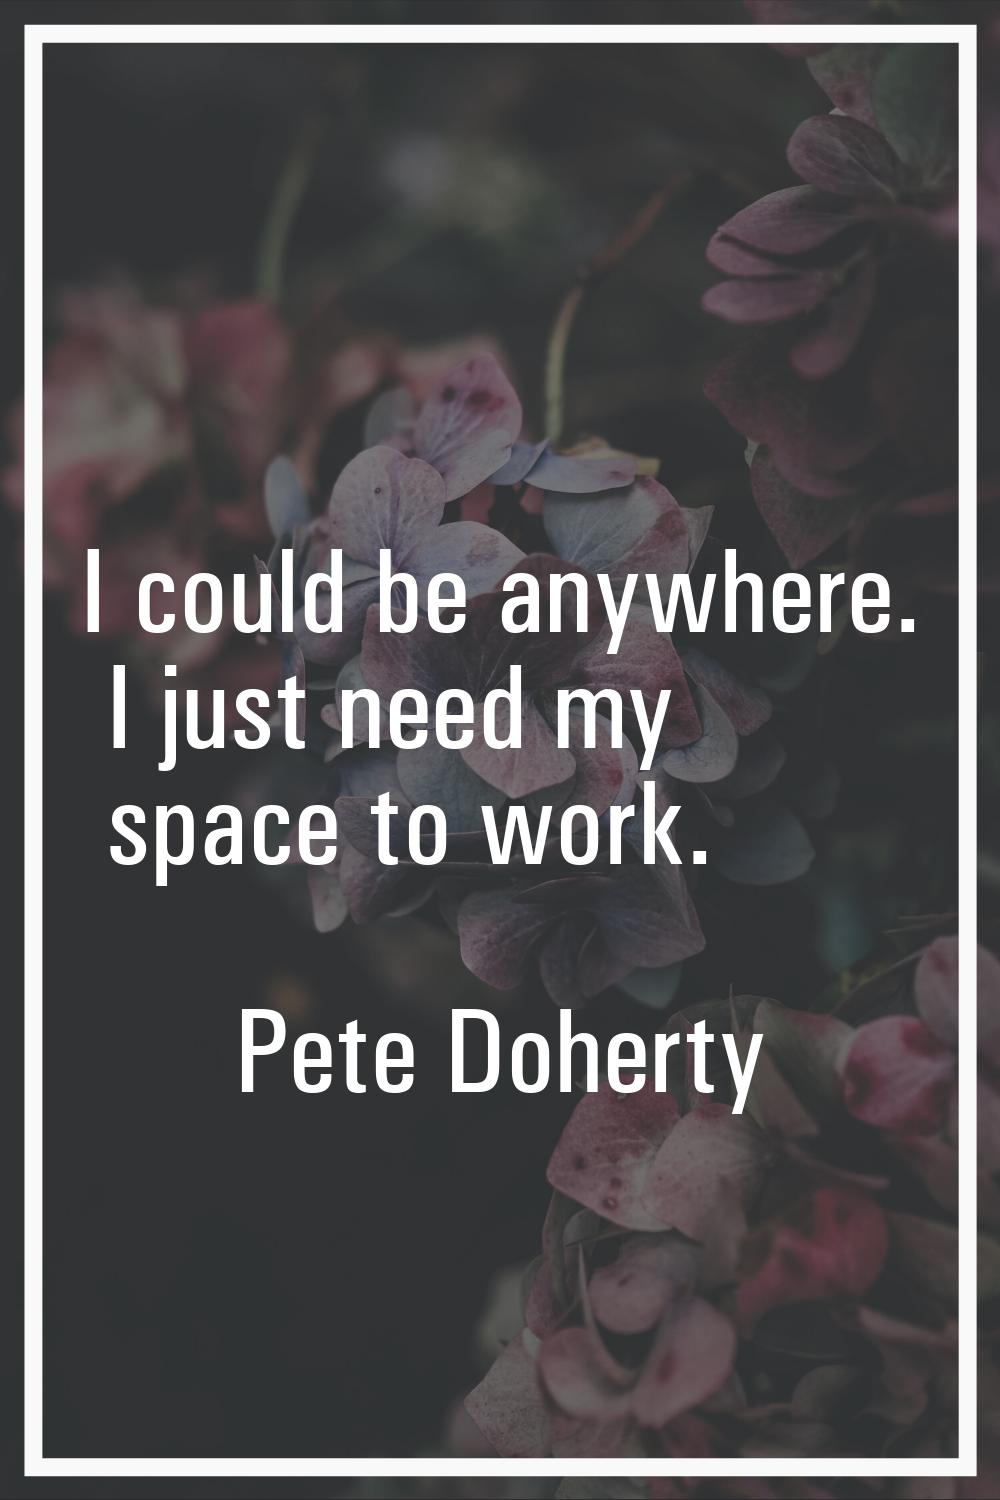 I could be anywhere. I just need my space to work.